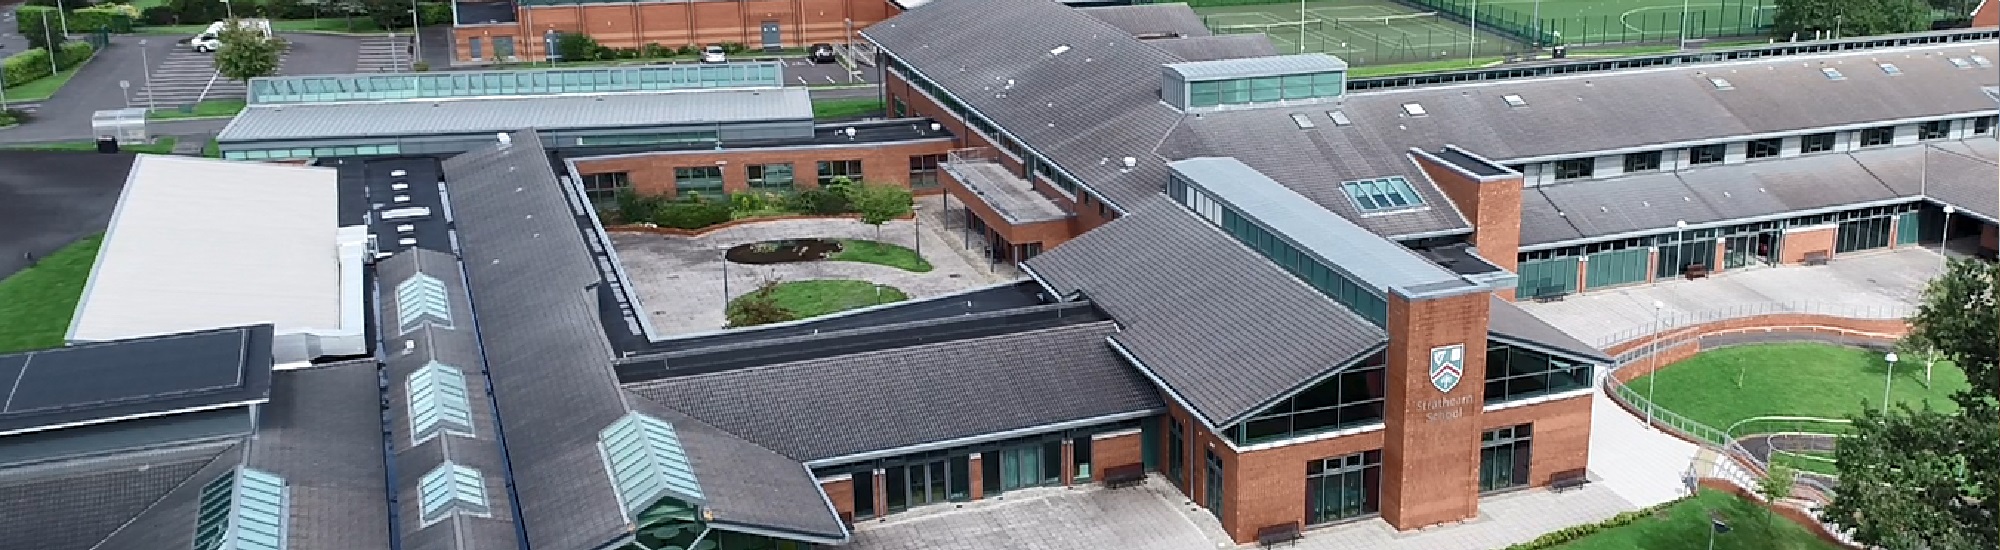 Strathearn School from above